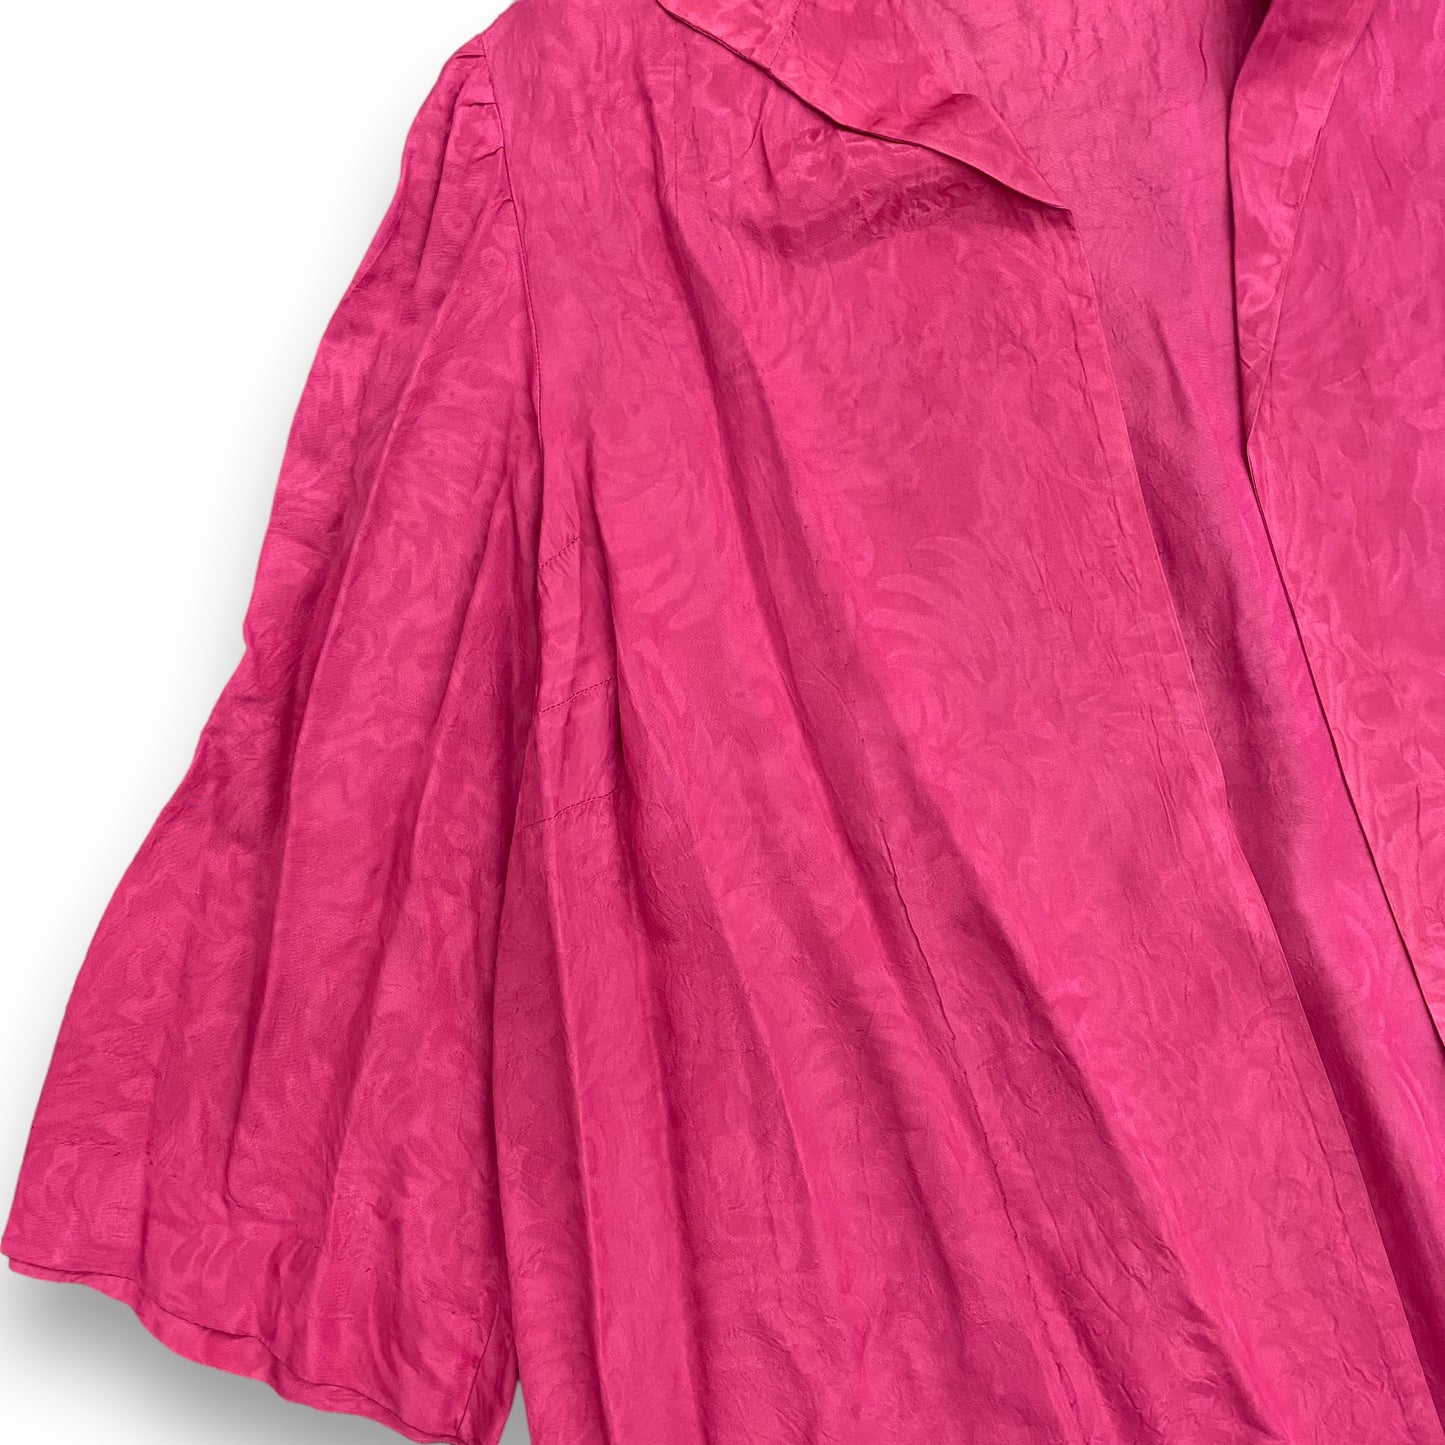 1940s Bell Sleeve Magenta Duster Jacket - Size Large